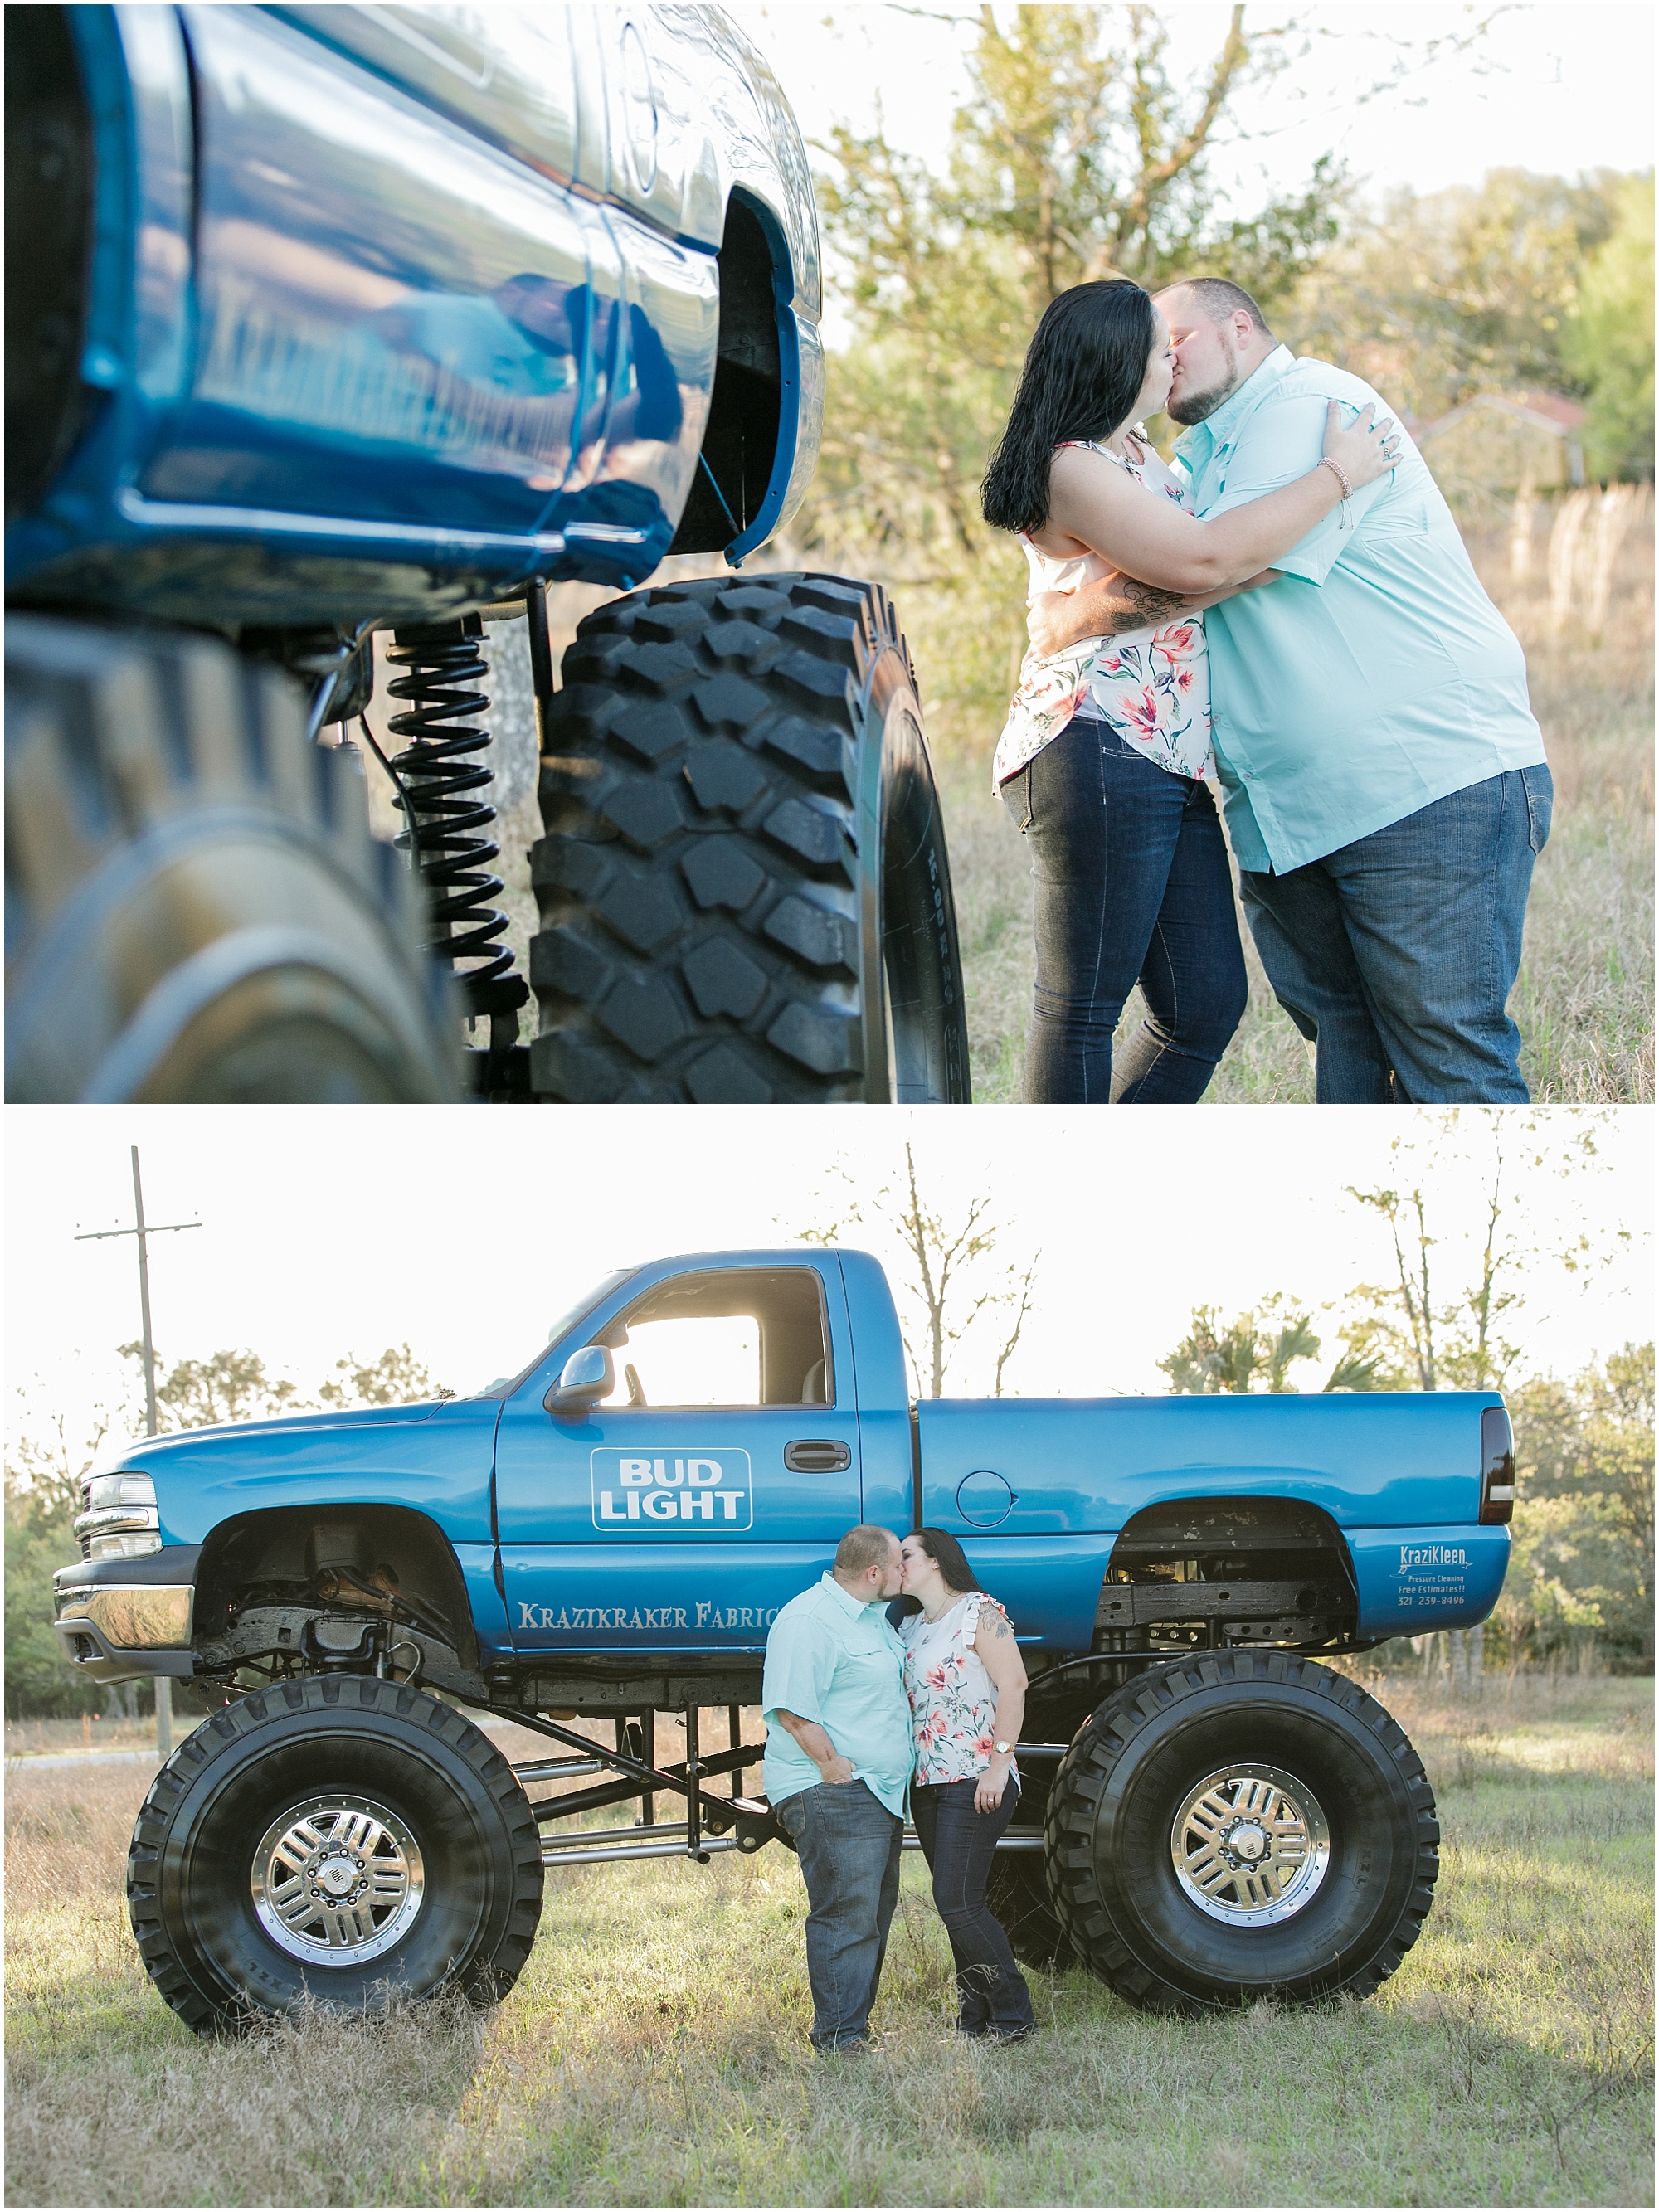 A monster truck in the field with engaged couple kiss and take photos around it.